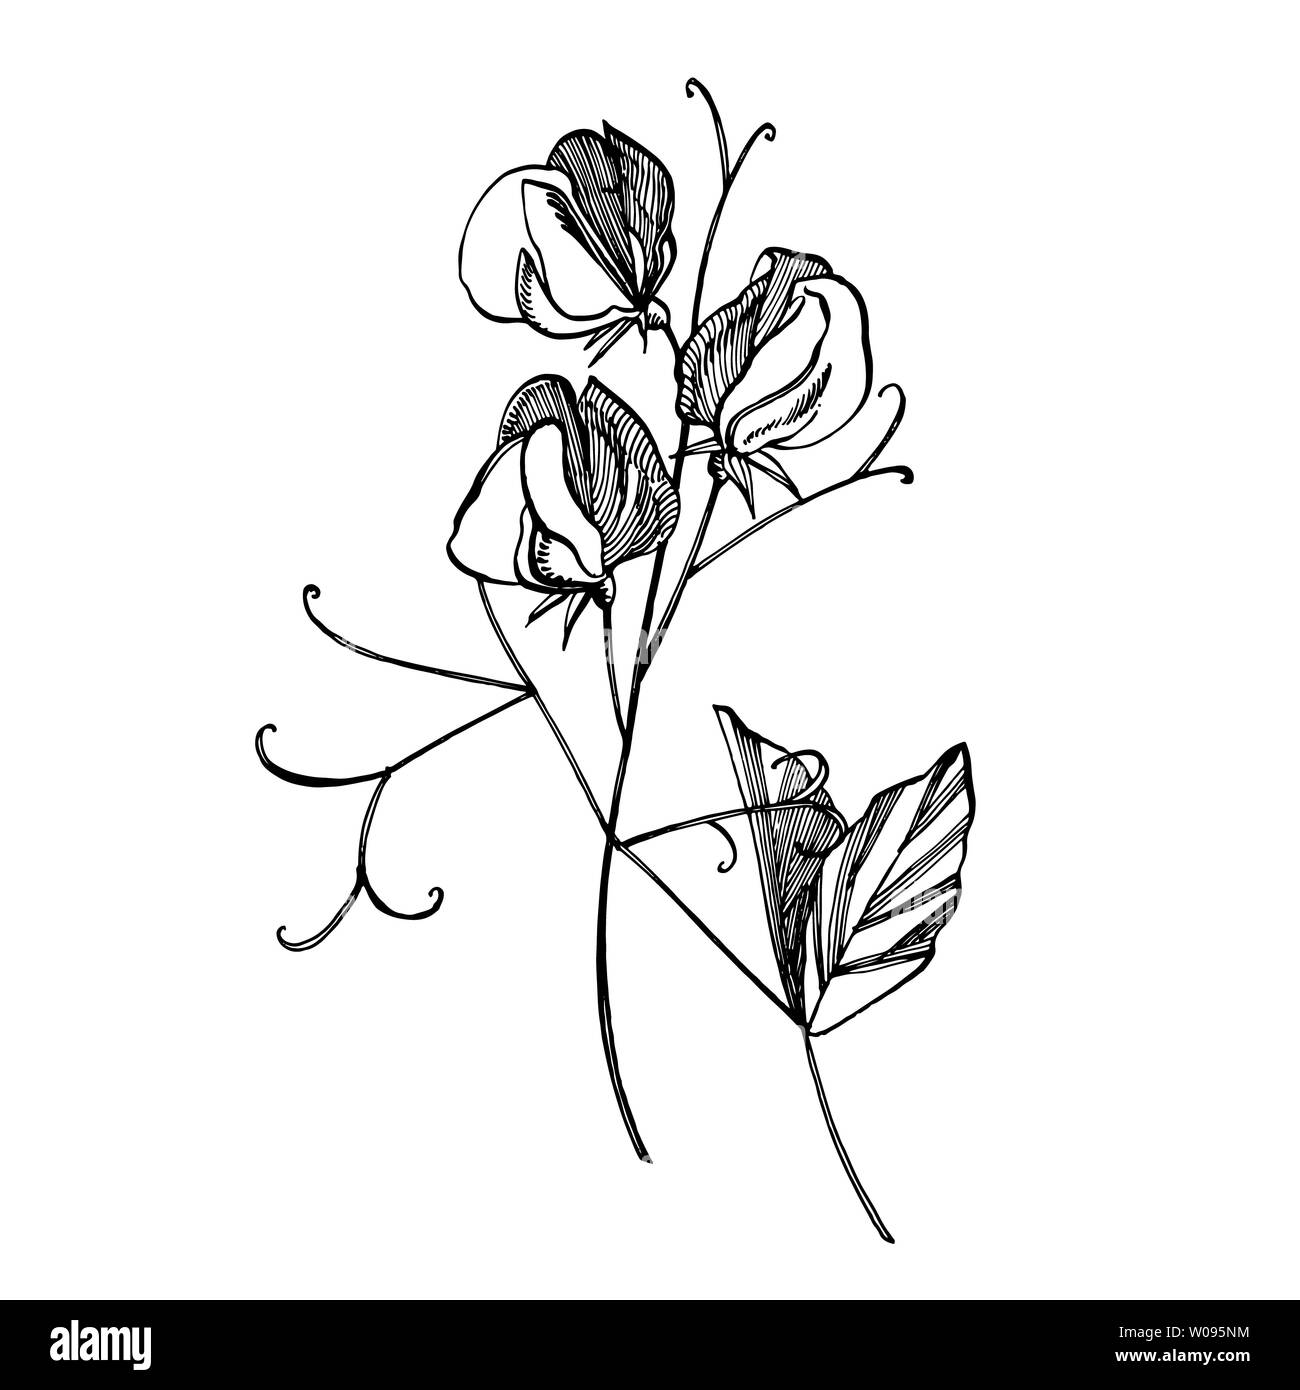 Sweet Pea Flowers Drawing And Sketch With Line Art On White Backgrounds Floral Pattern With Flowers Of Sweet Peas Elegant The Template For Fabric P Stock Photo Alamy